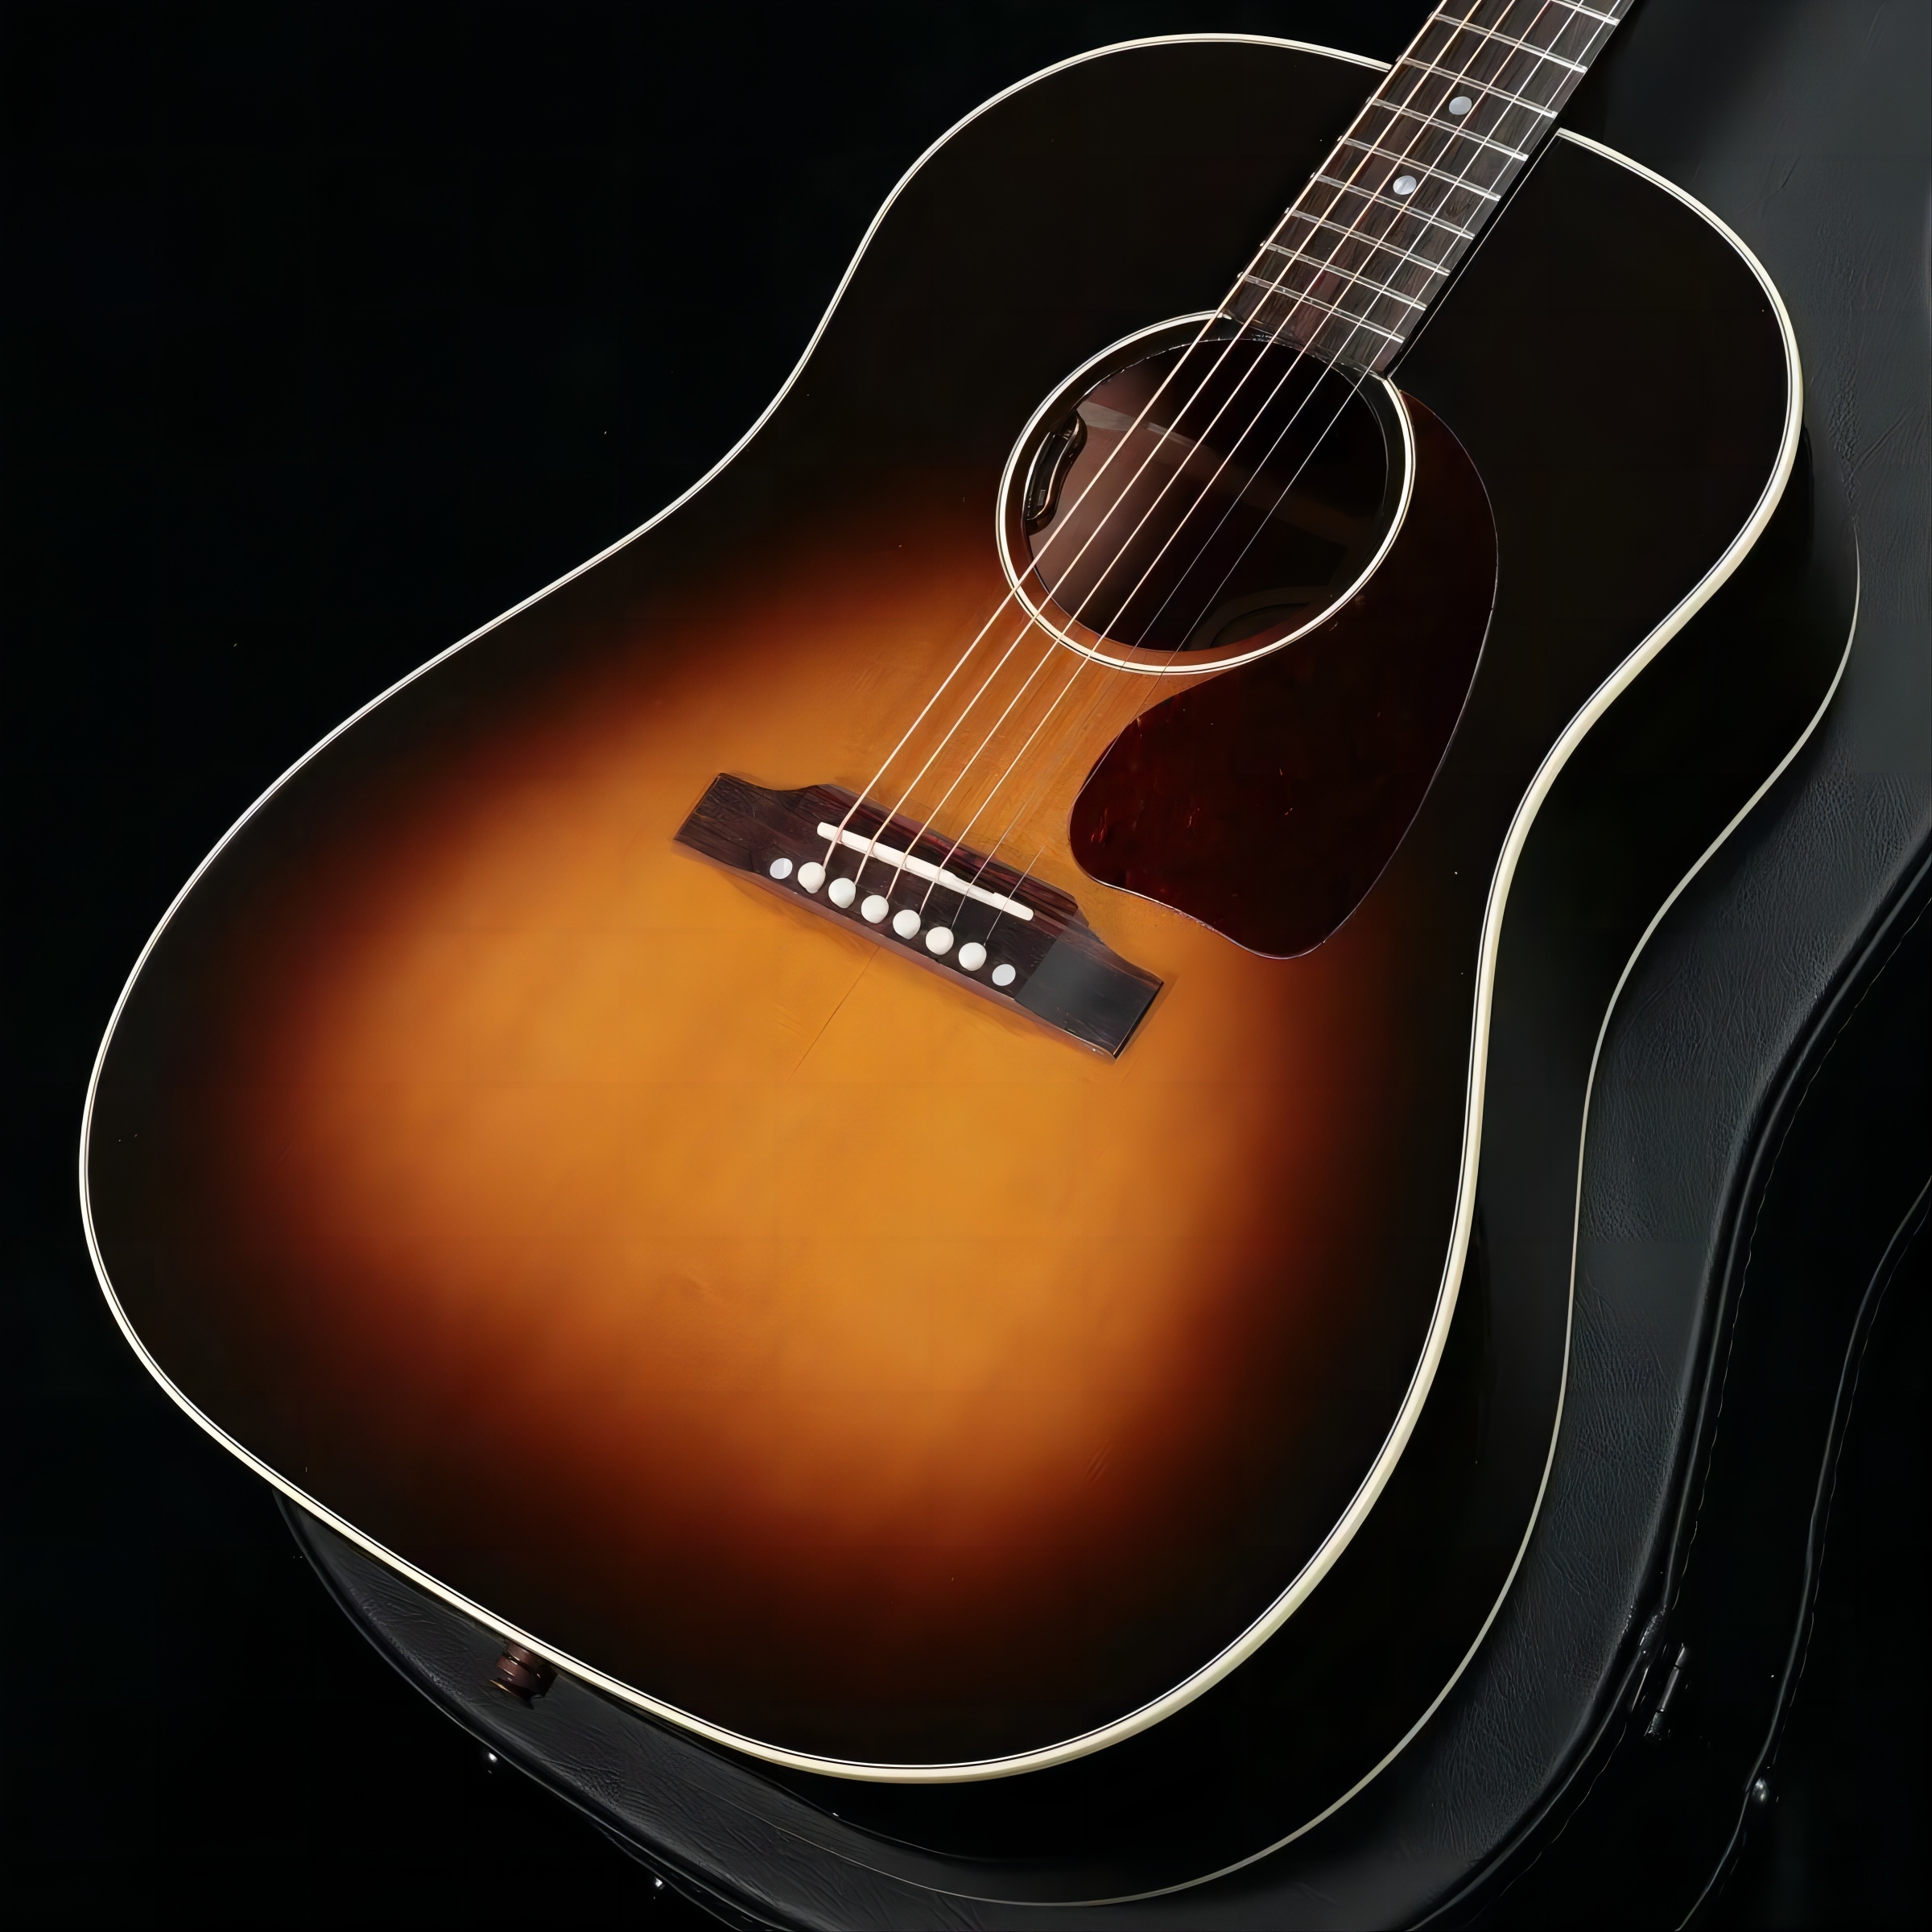 

Custom guitar, solid spruce top, rosewood fingerboard, mahogany sides and back, 41-inch high-quality acoustic guitar,